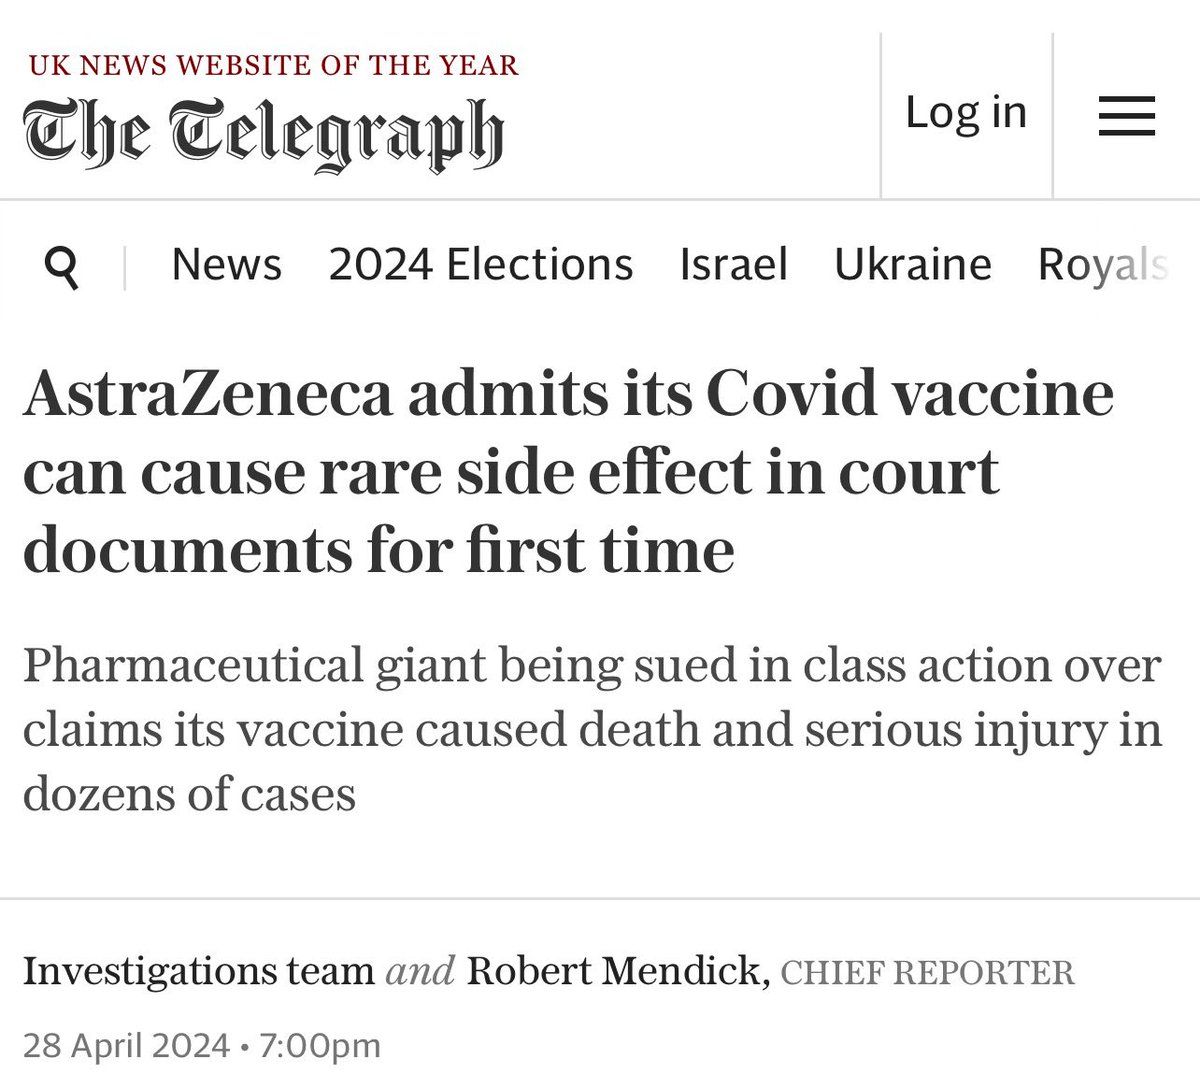 “AstraZeneca has admitted for the first time in court documents that its Covid vaccine can cause a rare side effect, in an apparent about-turn that could pave the way for a multi-million pound legal payout. The pharmaceutical giant is being sued in a class action over claims